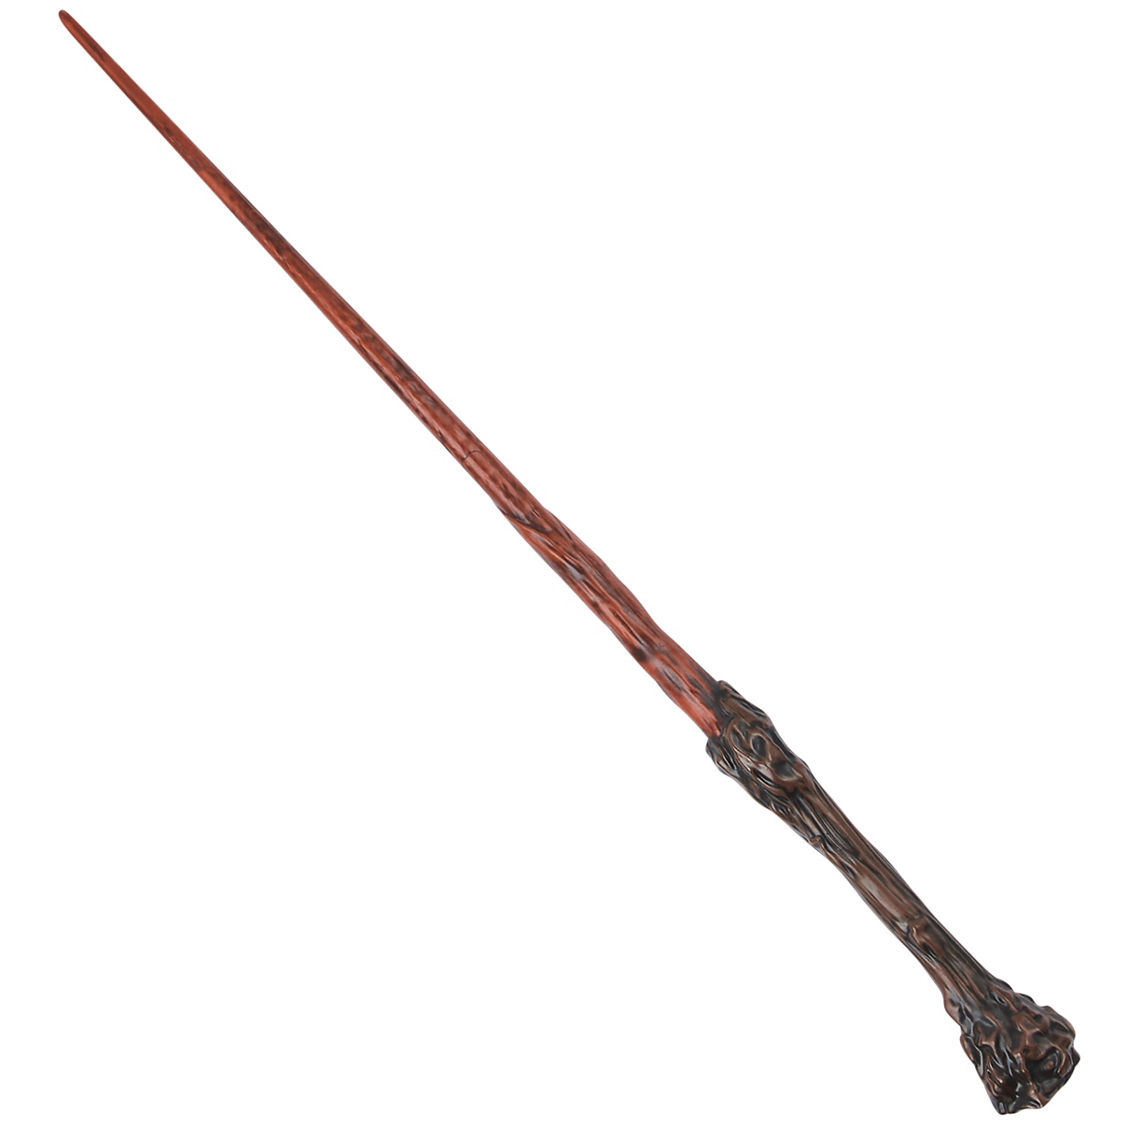 Wizarding World Character Wand Harry - Image 2 of 2